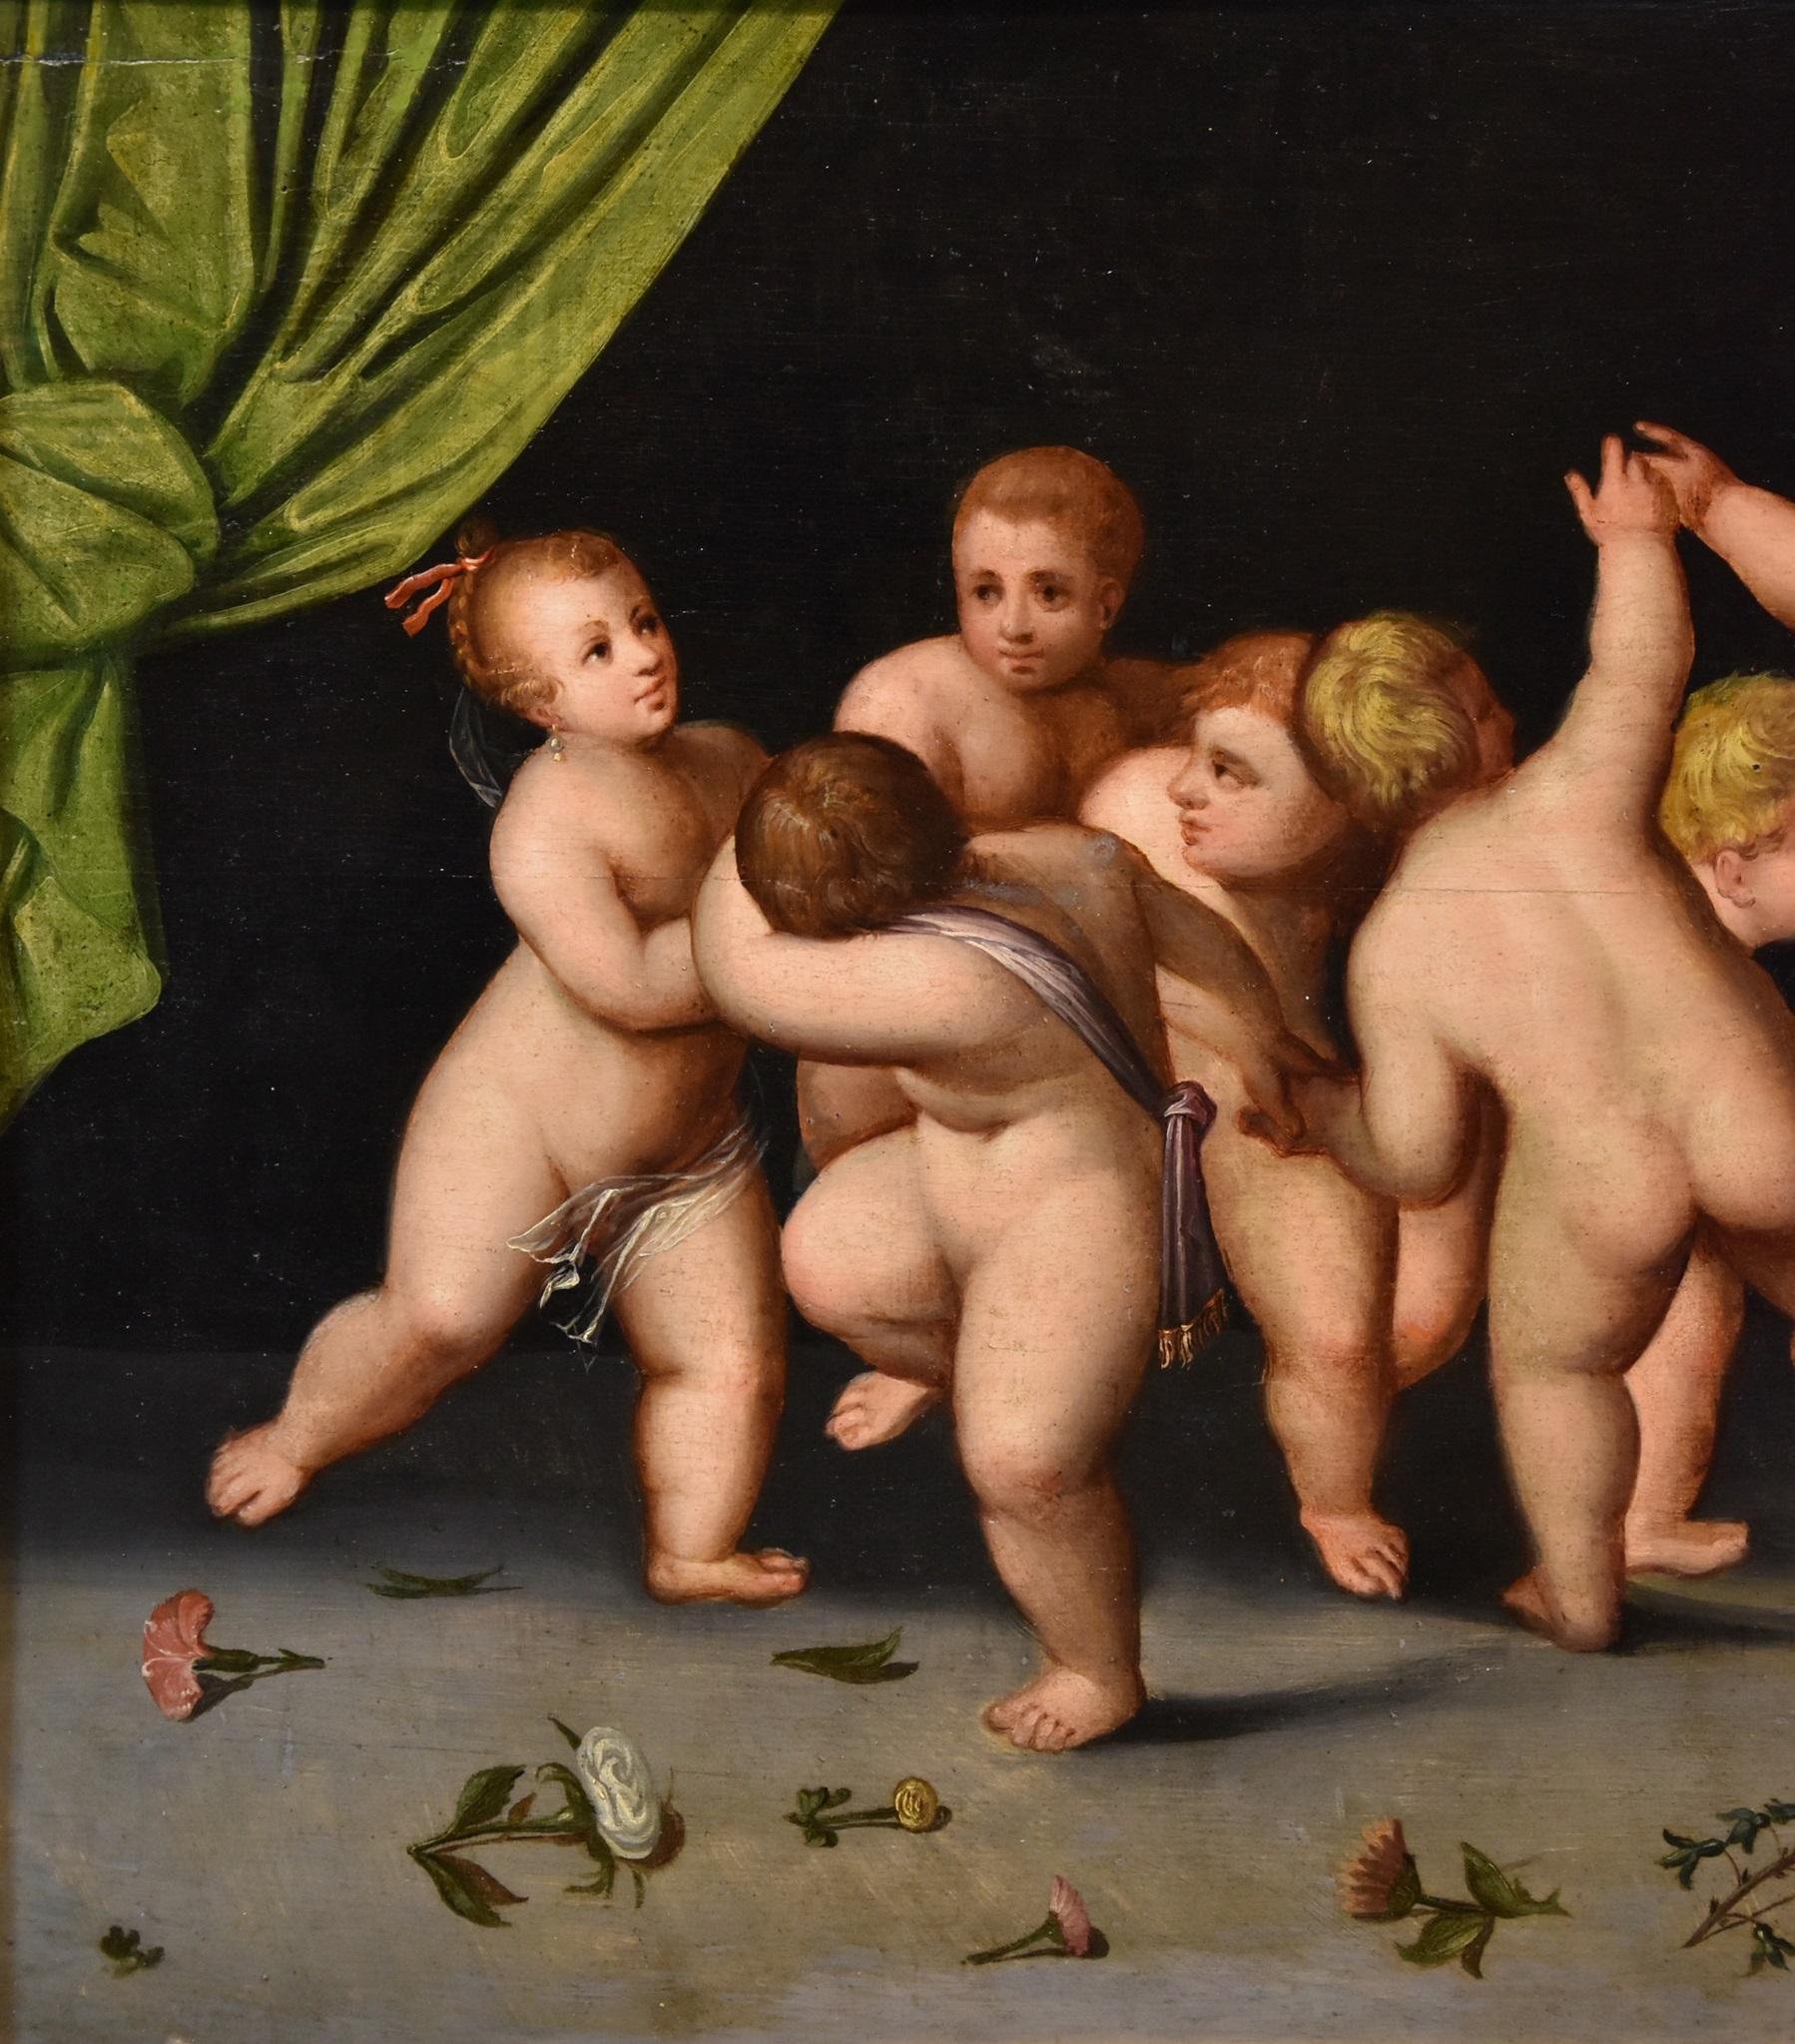 Cornelis van Cleve, or Van Cleef (Antwerp, 1520 - 1567) workshop
Flemish School, late 16th century
Dance of Putti

Oil on wood panel
51 x 108 cm. - framed 67 x 124 cm.

Click HERE to see the full description of the painting

The particular subject